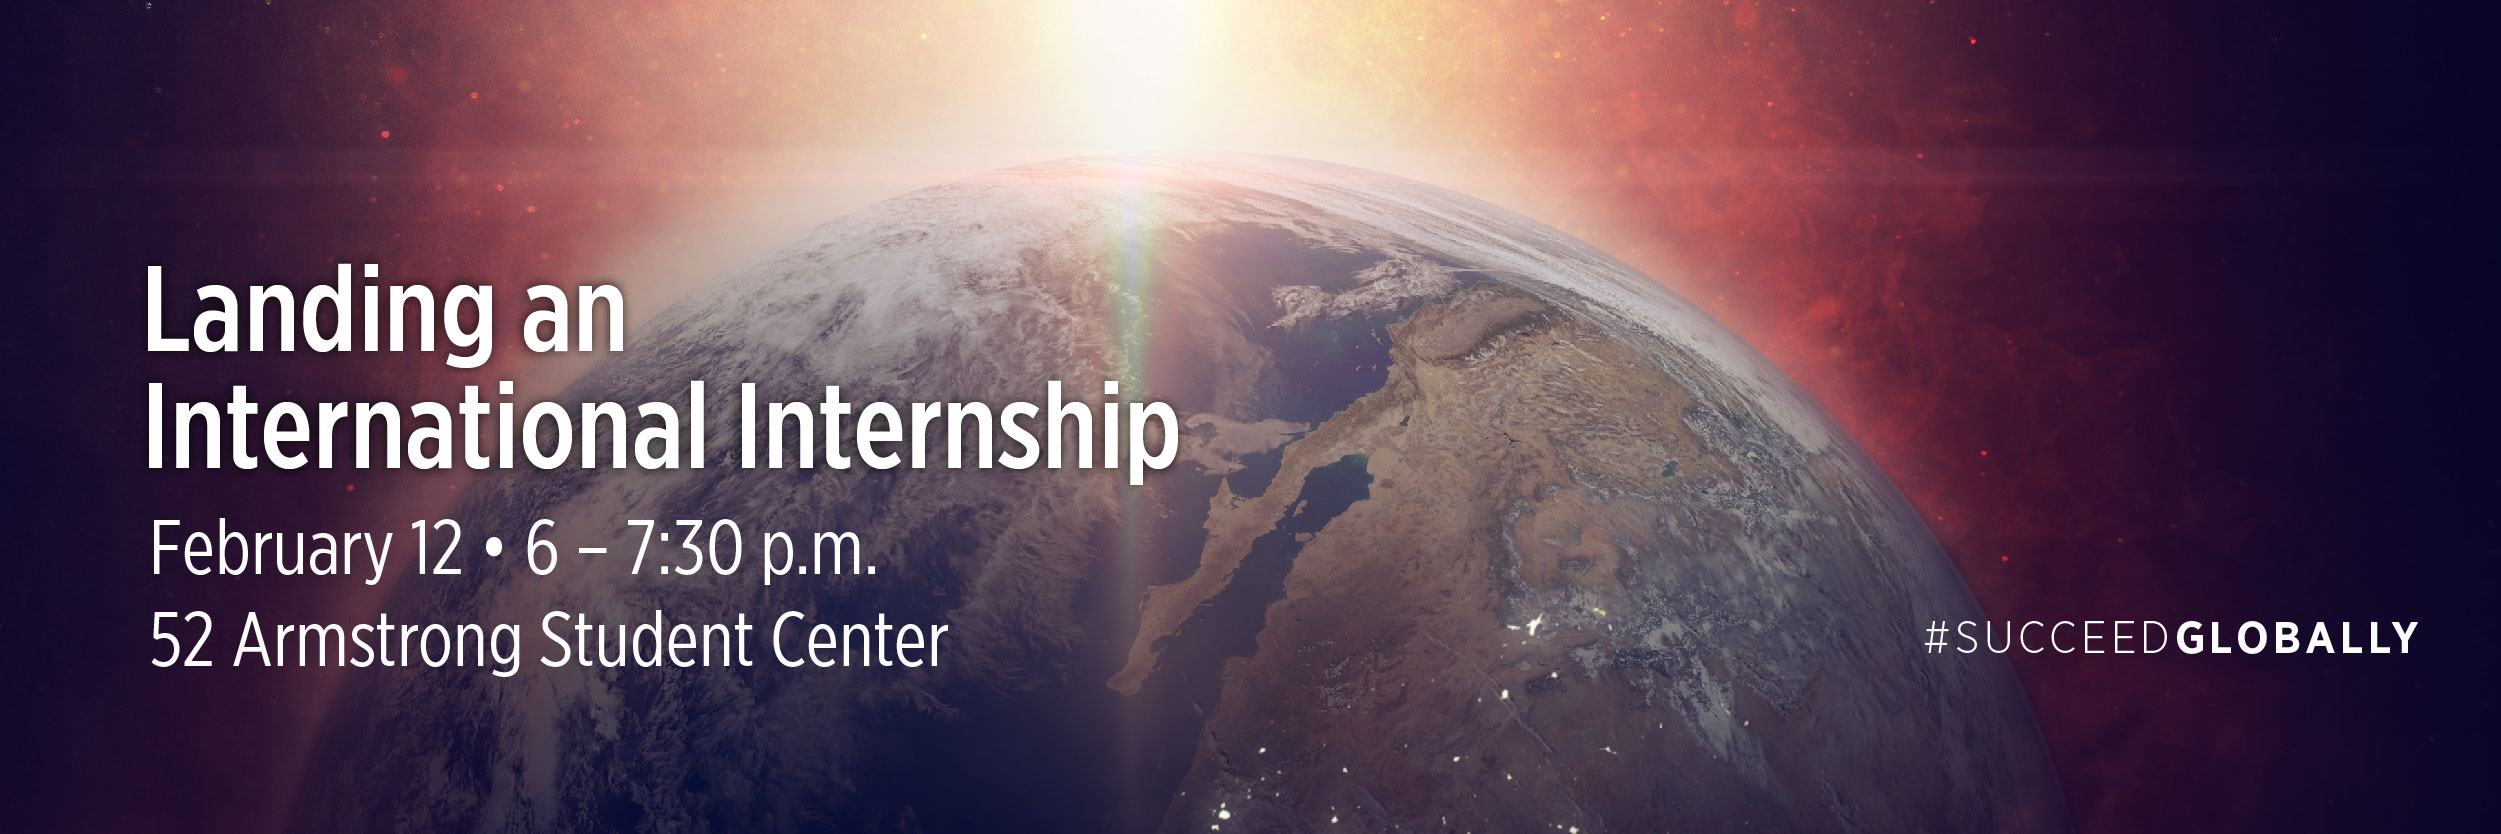 Landing an International Internship on Feb. 12 from 6 – 7:30 pm at 52 Armstrong Student Center